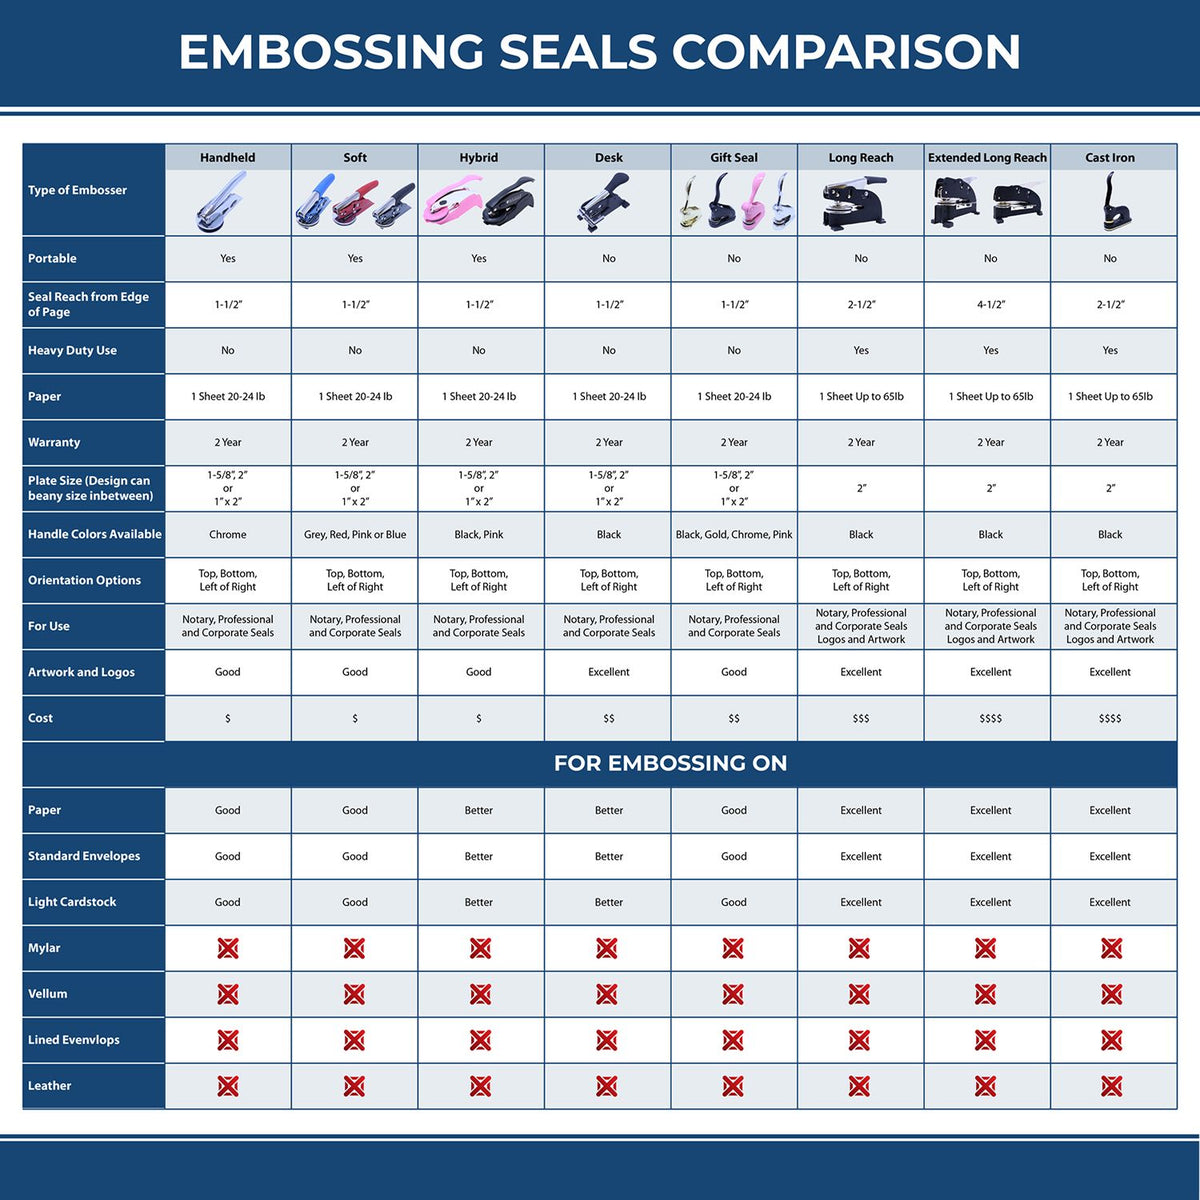 A comparison chart for the different types of mount models available for the Heavy Duty Cast Iron Hawaii Engineer Seal Embosser.